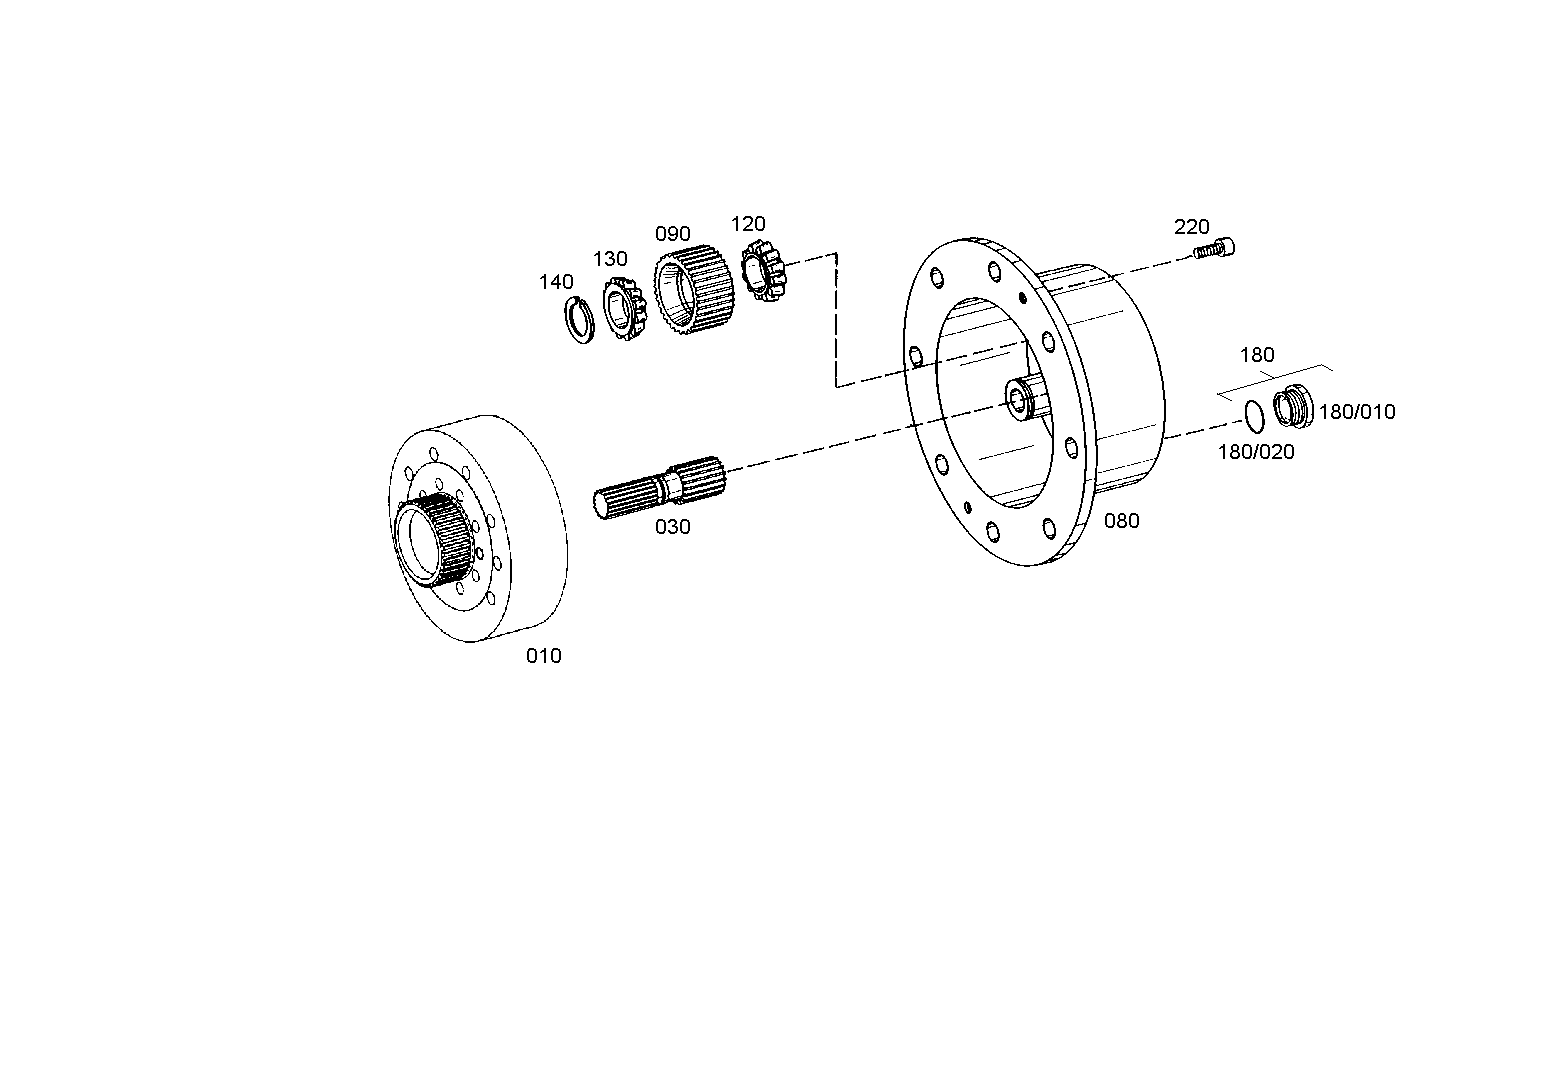 drawing for AGCO F514300020460 - PLANETARY GEAR (figure 3)